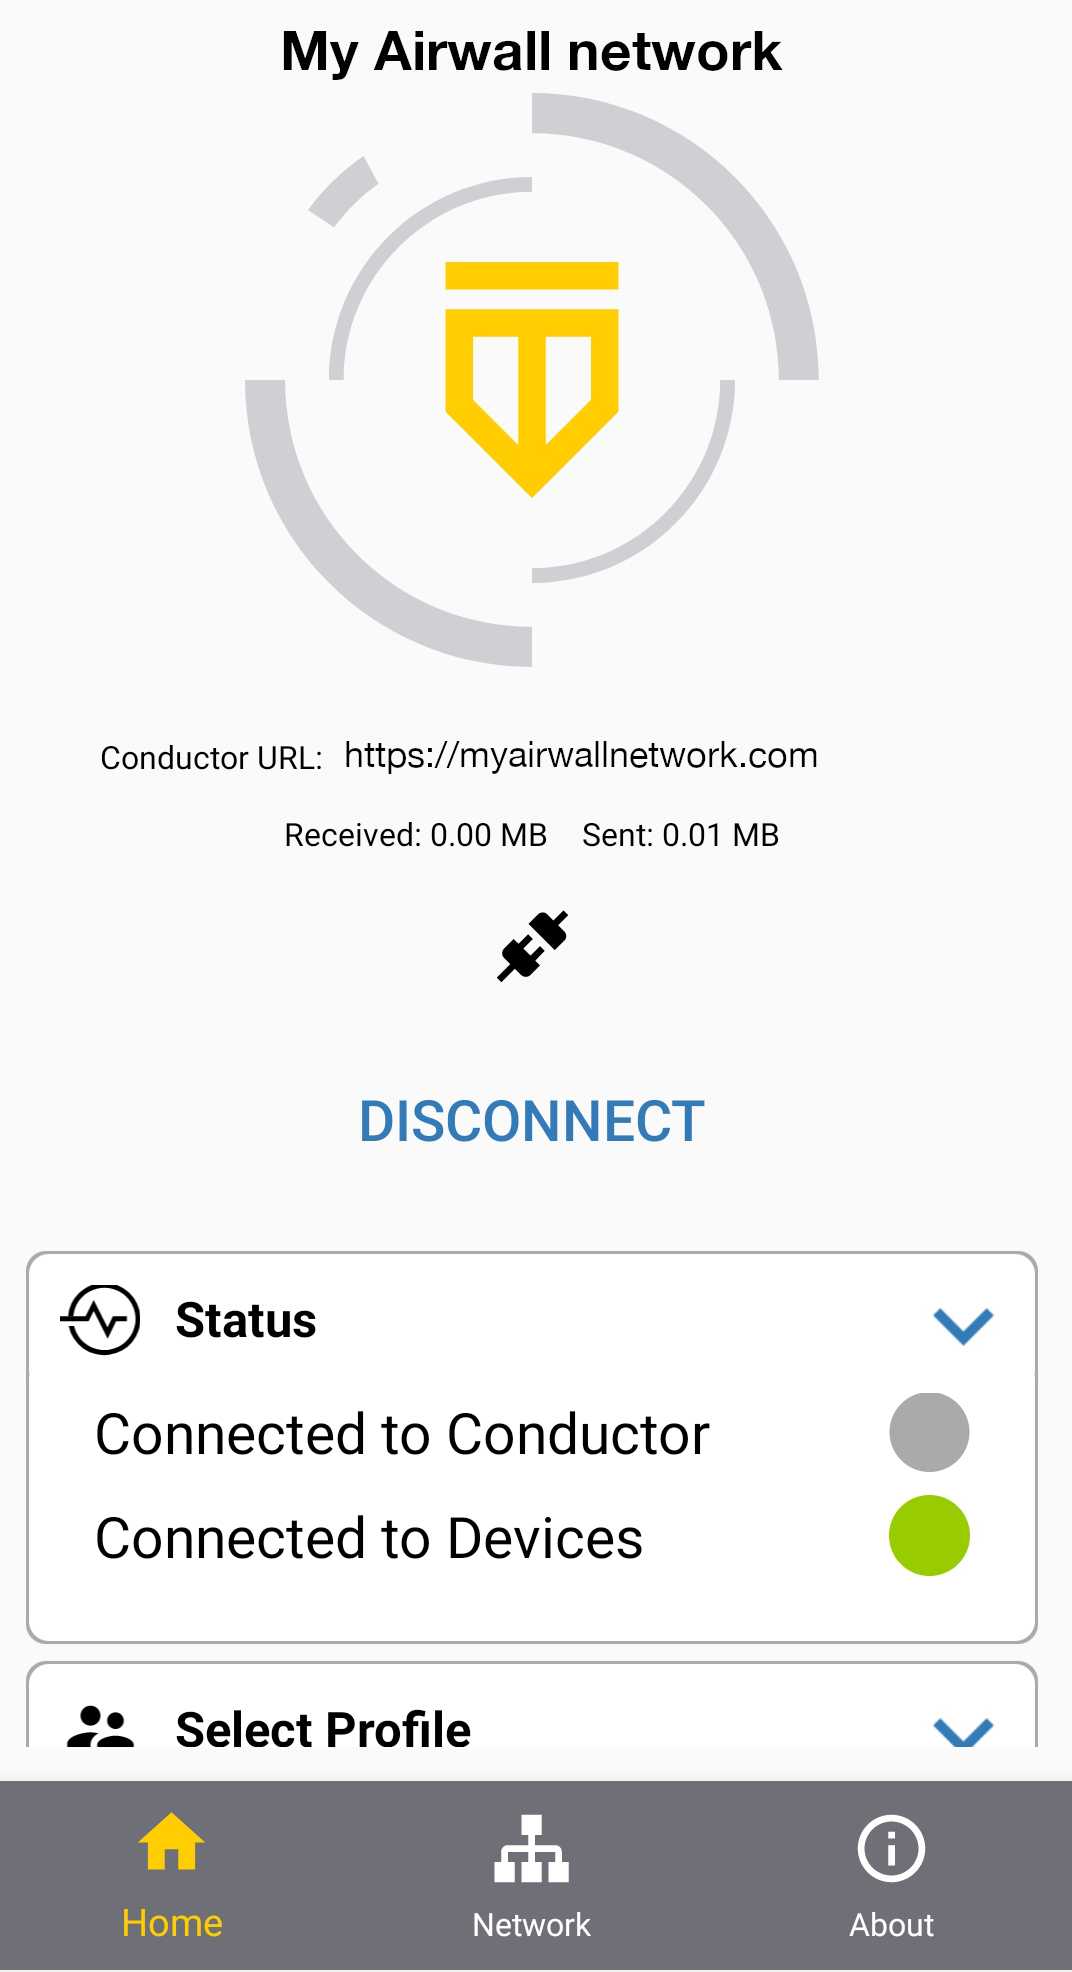 Status showing Disconnected mode - not connected to Conductor and still connected to devices